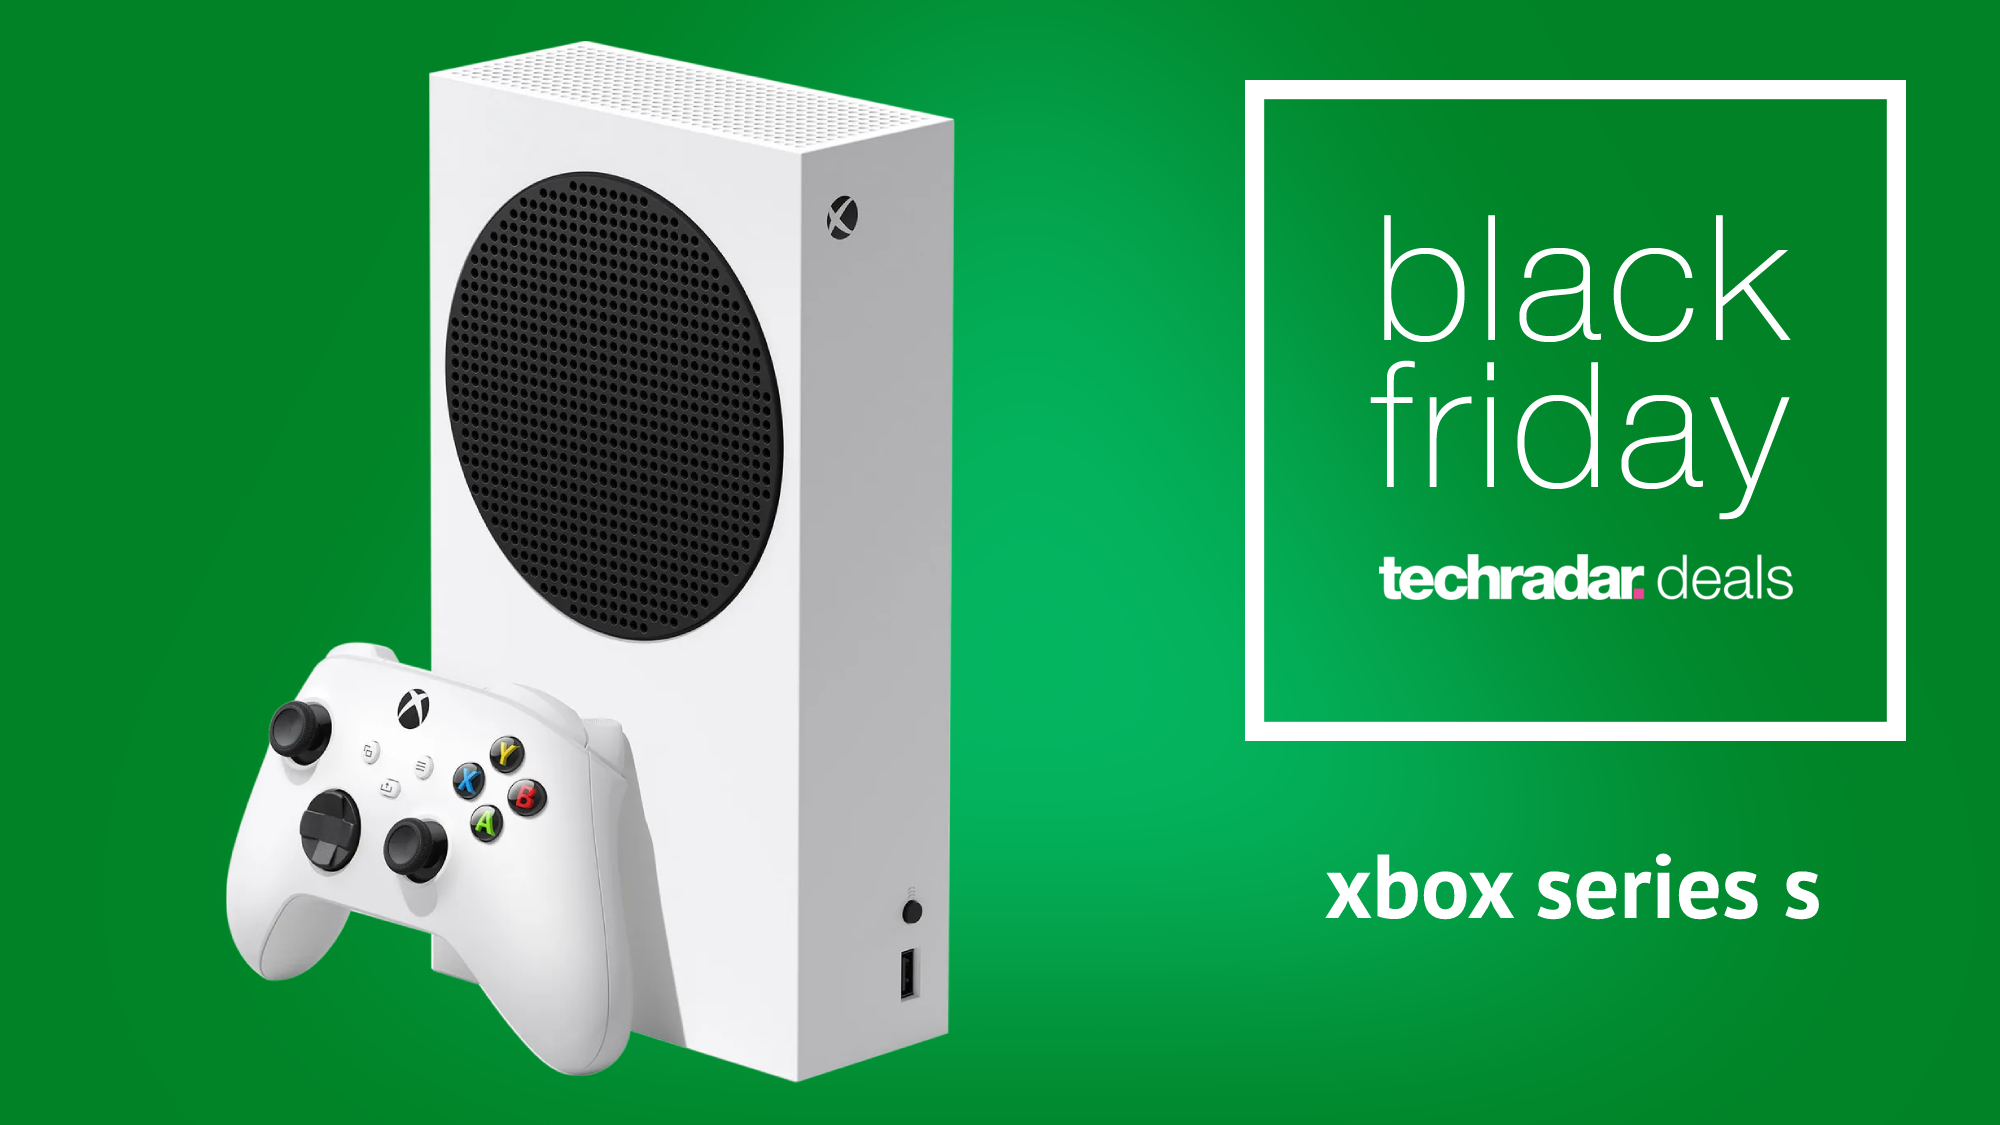 Xbox Series S Black Friday-deal